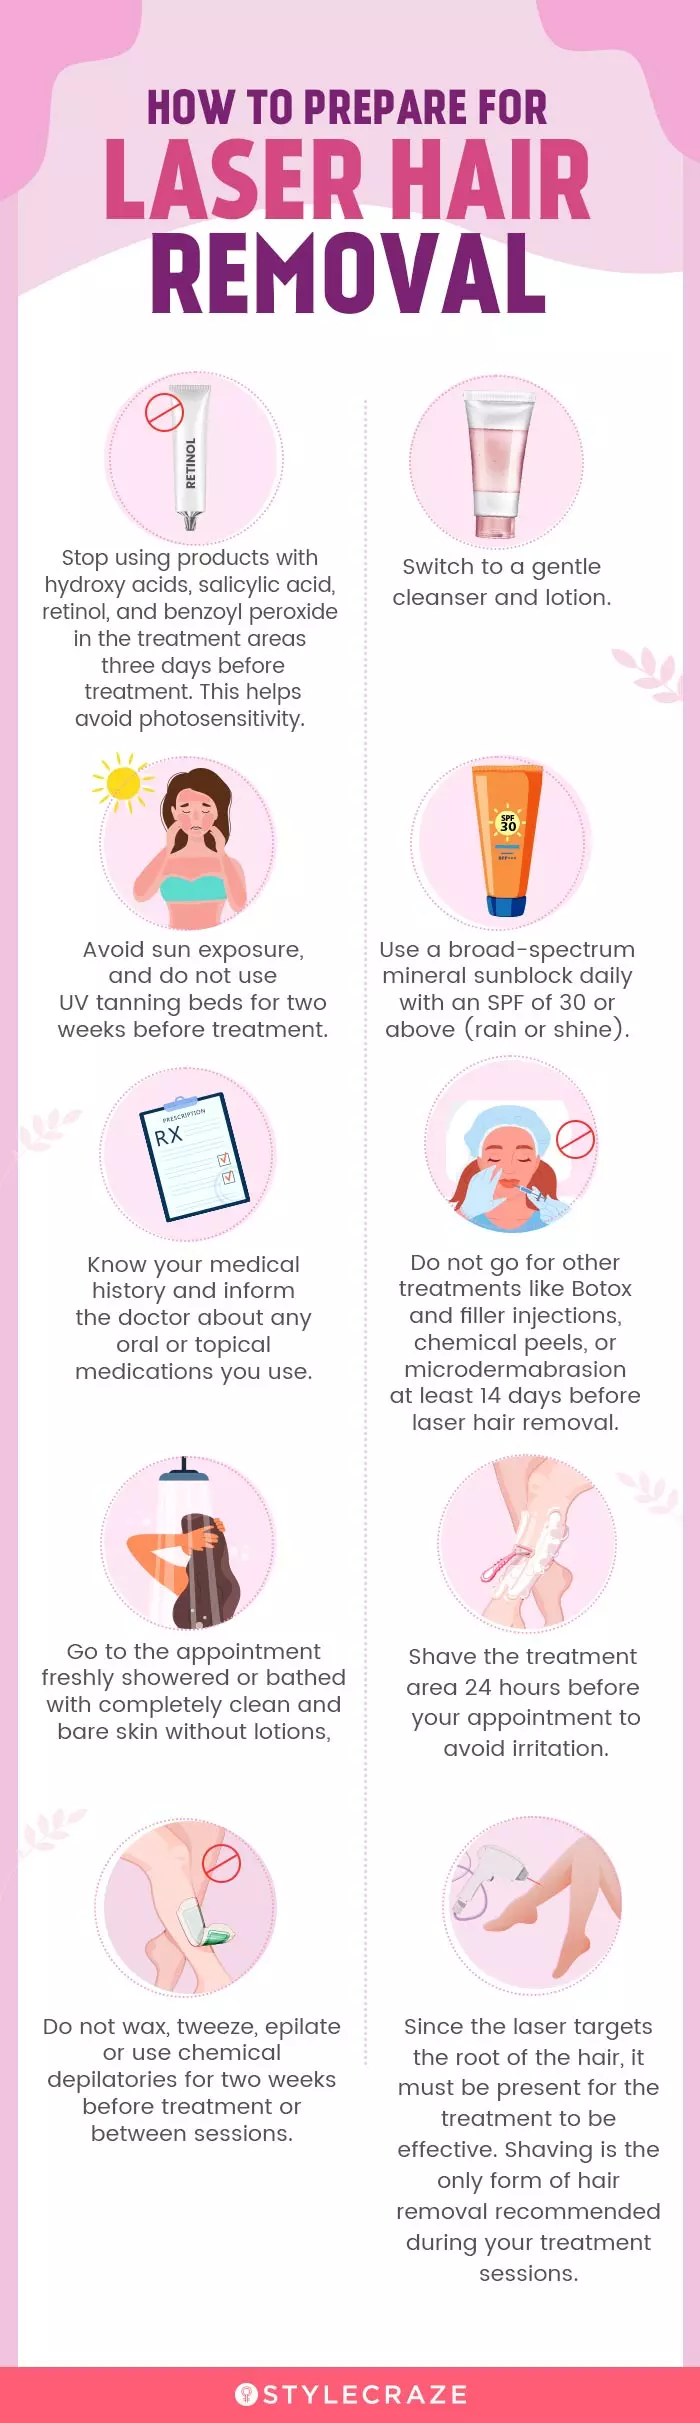 how to prepare for laser hair removal (infographic)